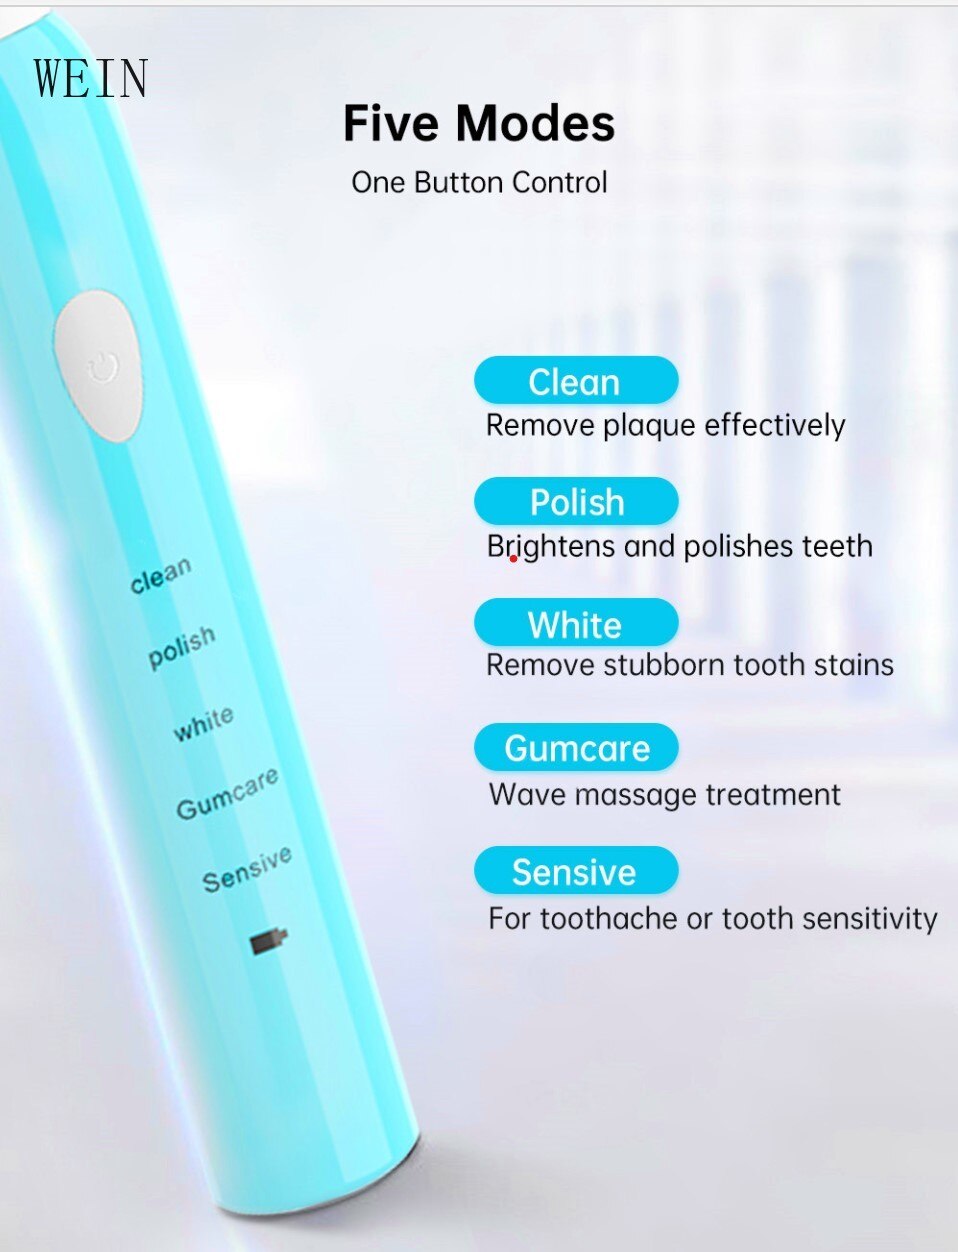 new sonic toothbrush kid electr electric toothbrush adult Waterproof Replaceable cepillo electrico Whitening Teeth Brush